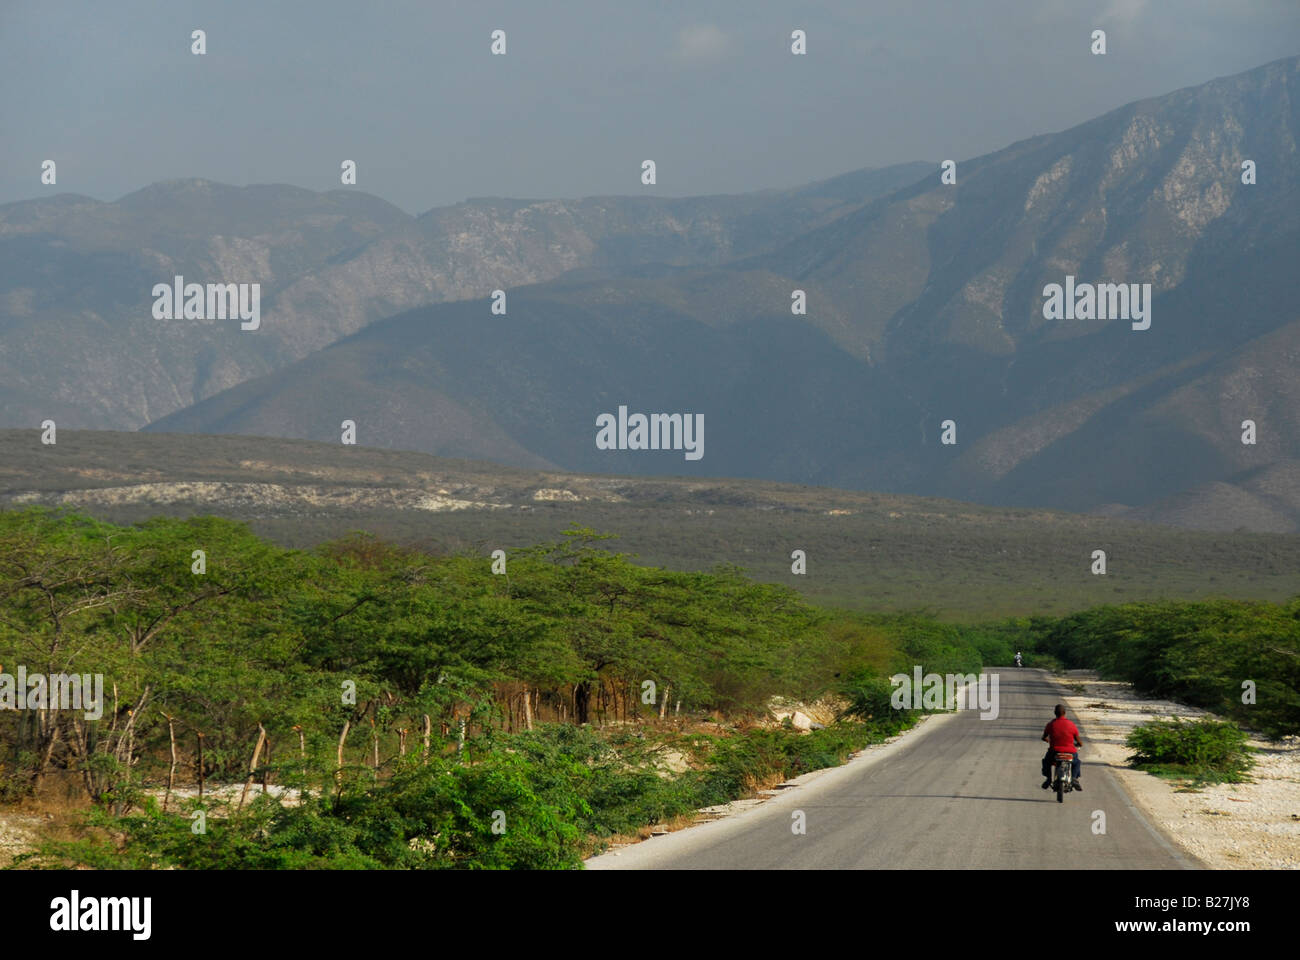 Motorcyclist on the road, coast of Lake Enriquillo, Independencia Province, Dominican Republic Stock Photo